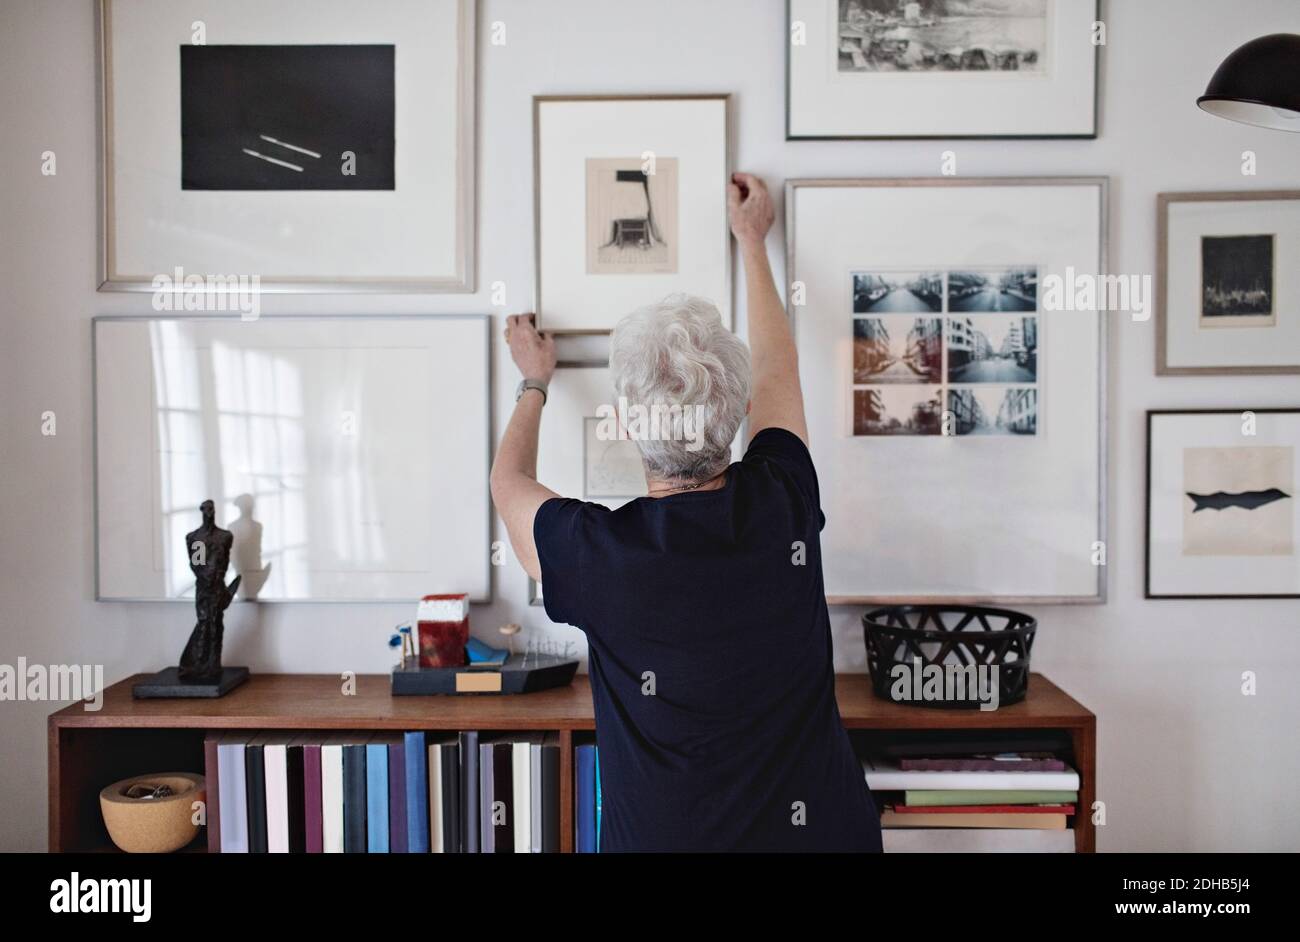 Rear view of retired senior woman adjusting picture frame on wall over bookshelf at home Stock Photo